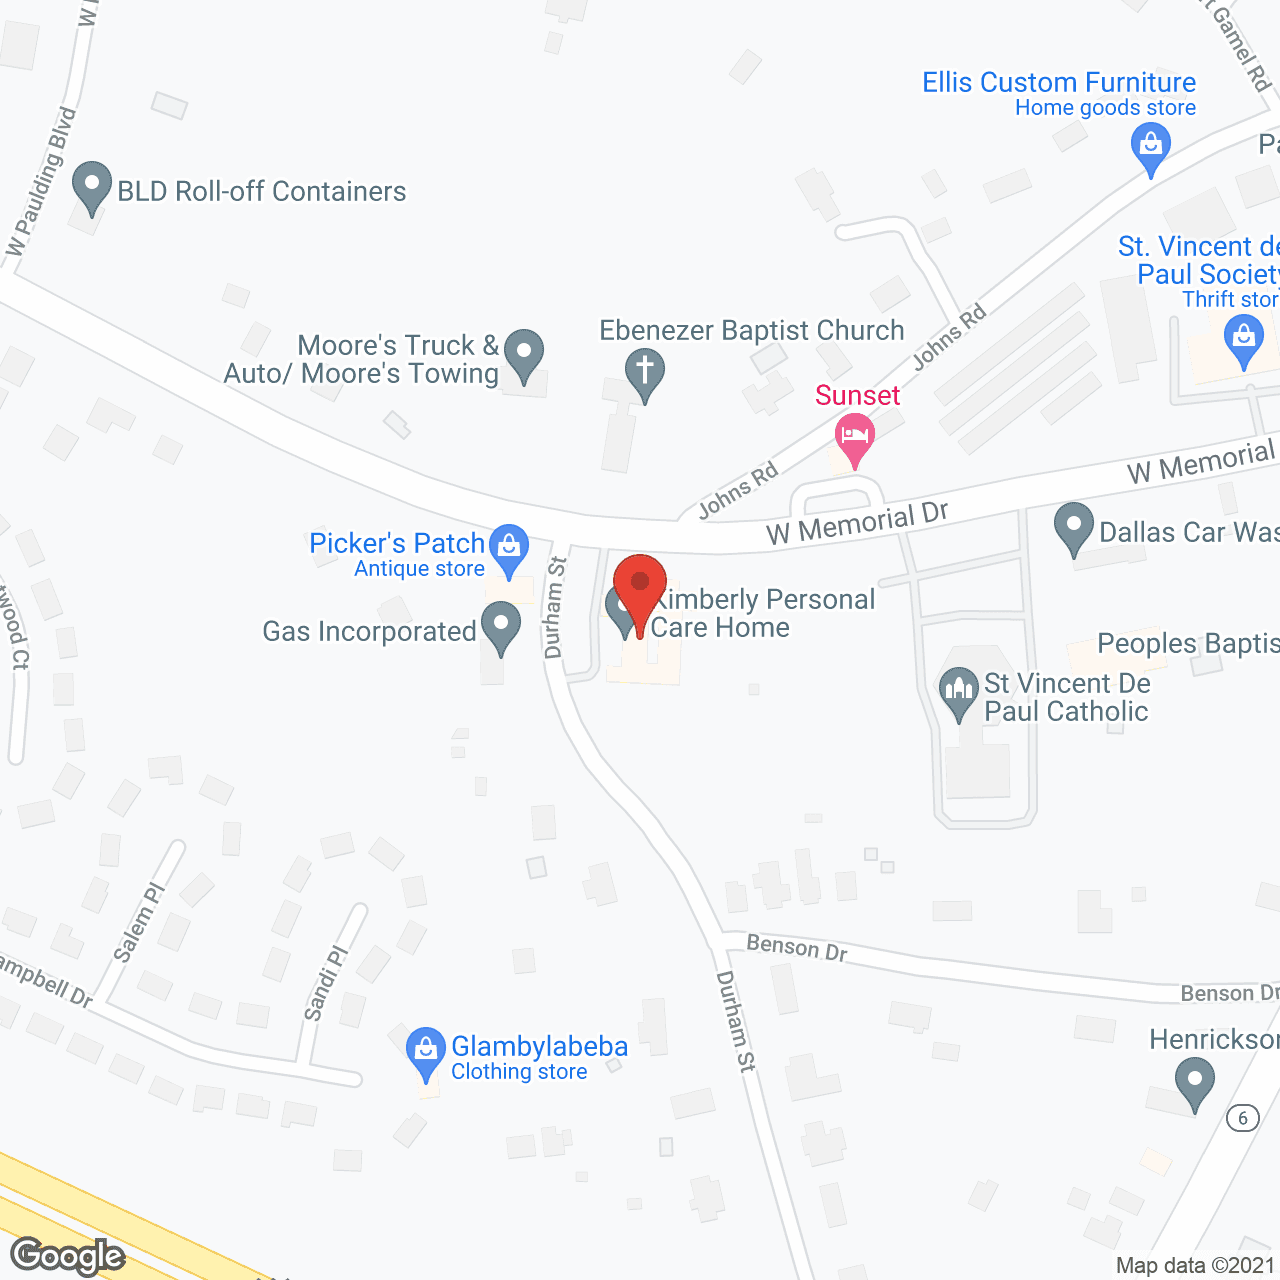 Kimberly Personal Care Home in google map